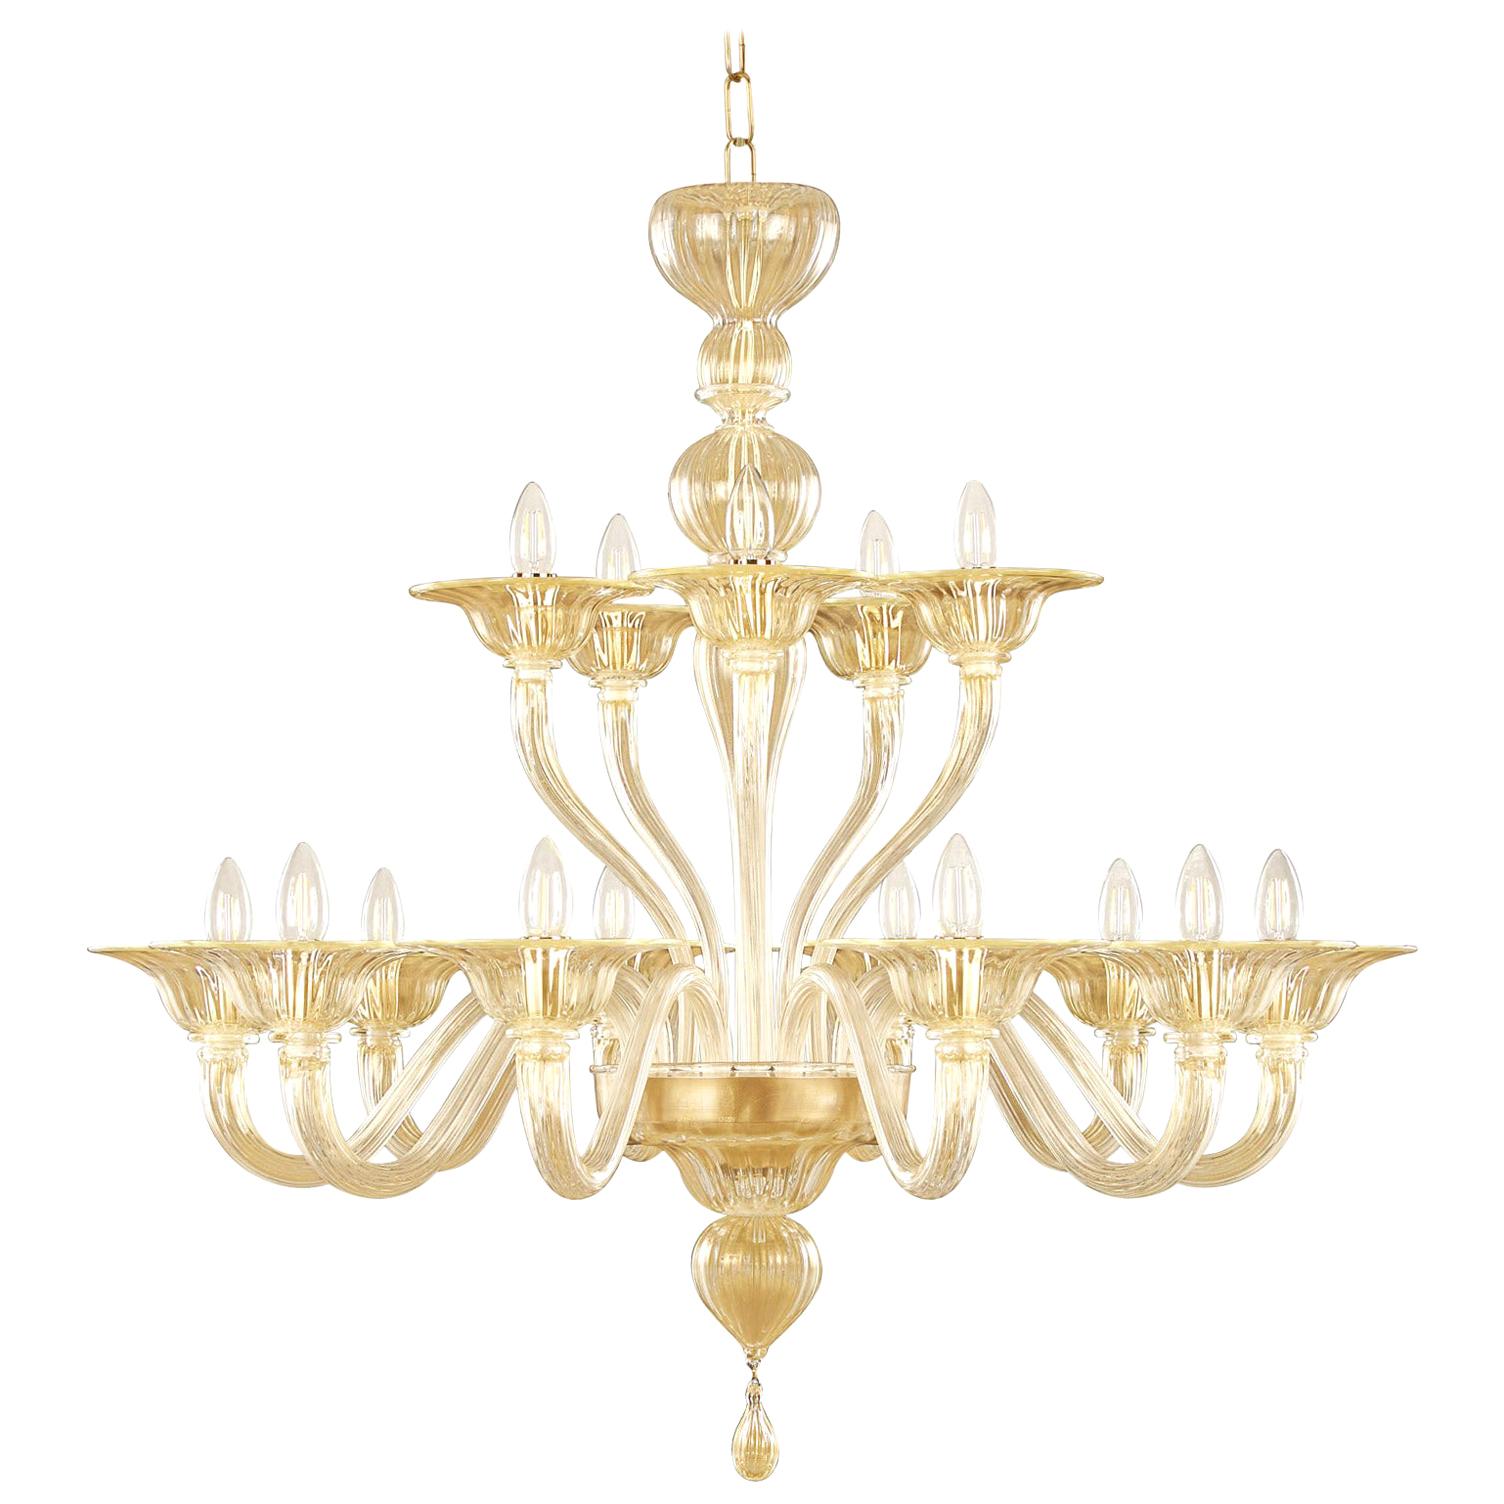 Chandelier 10+ 5 Arms Golden Artistic Glass Simplicissimus 360 by Multiforme For Sale